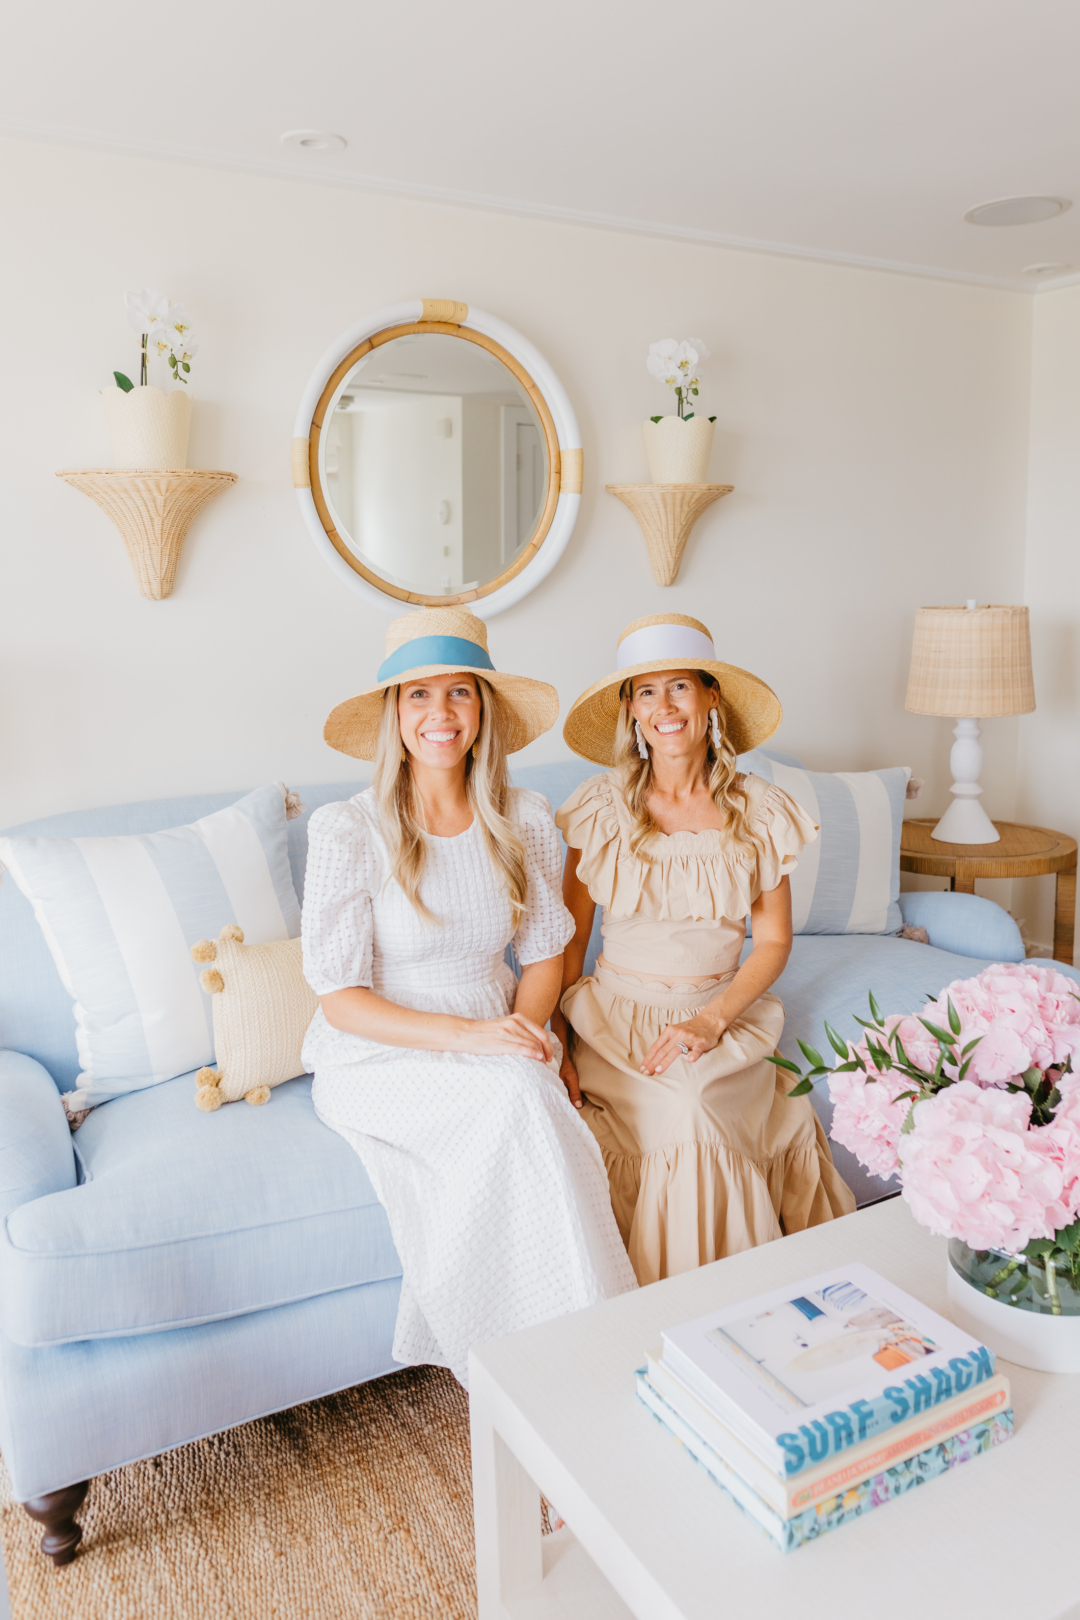 Travel: Designing the Endeavor Cottage with Serena & Lily at Inspirato Harborview Nantucket